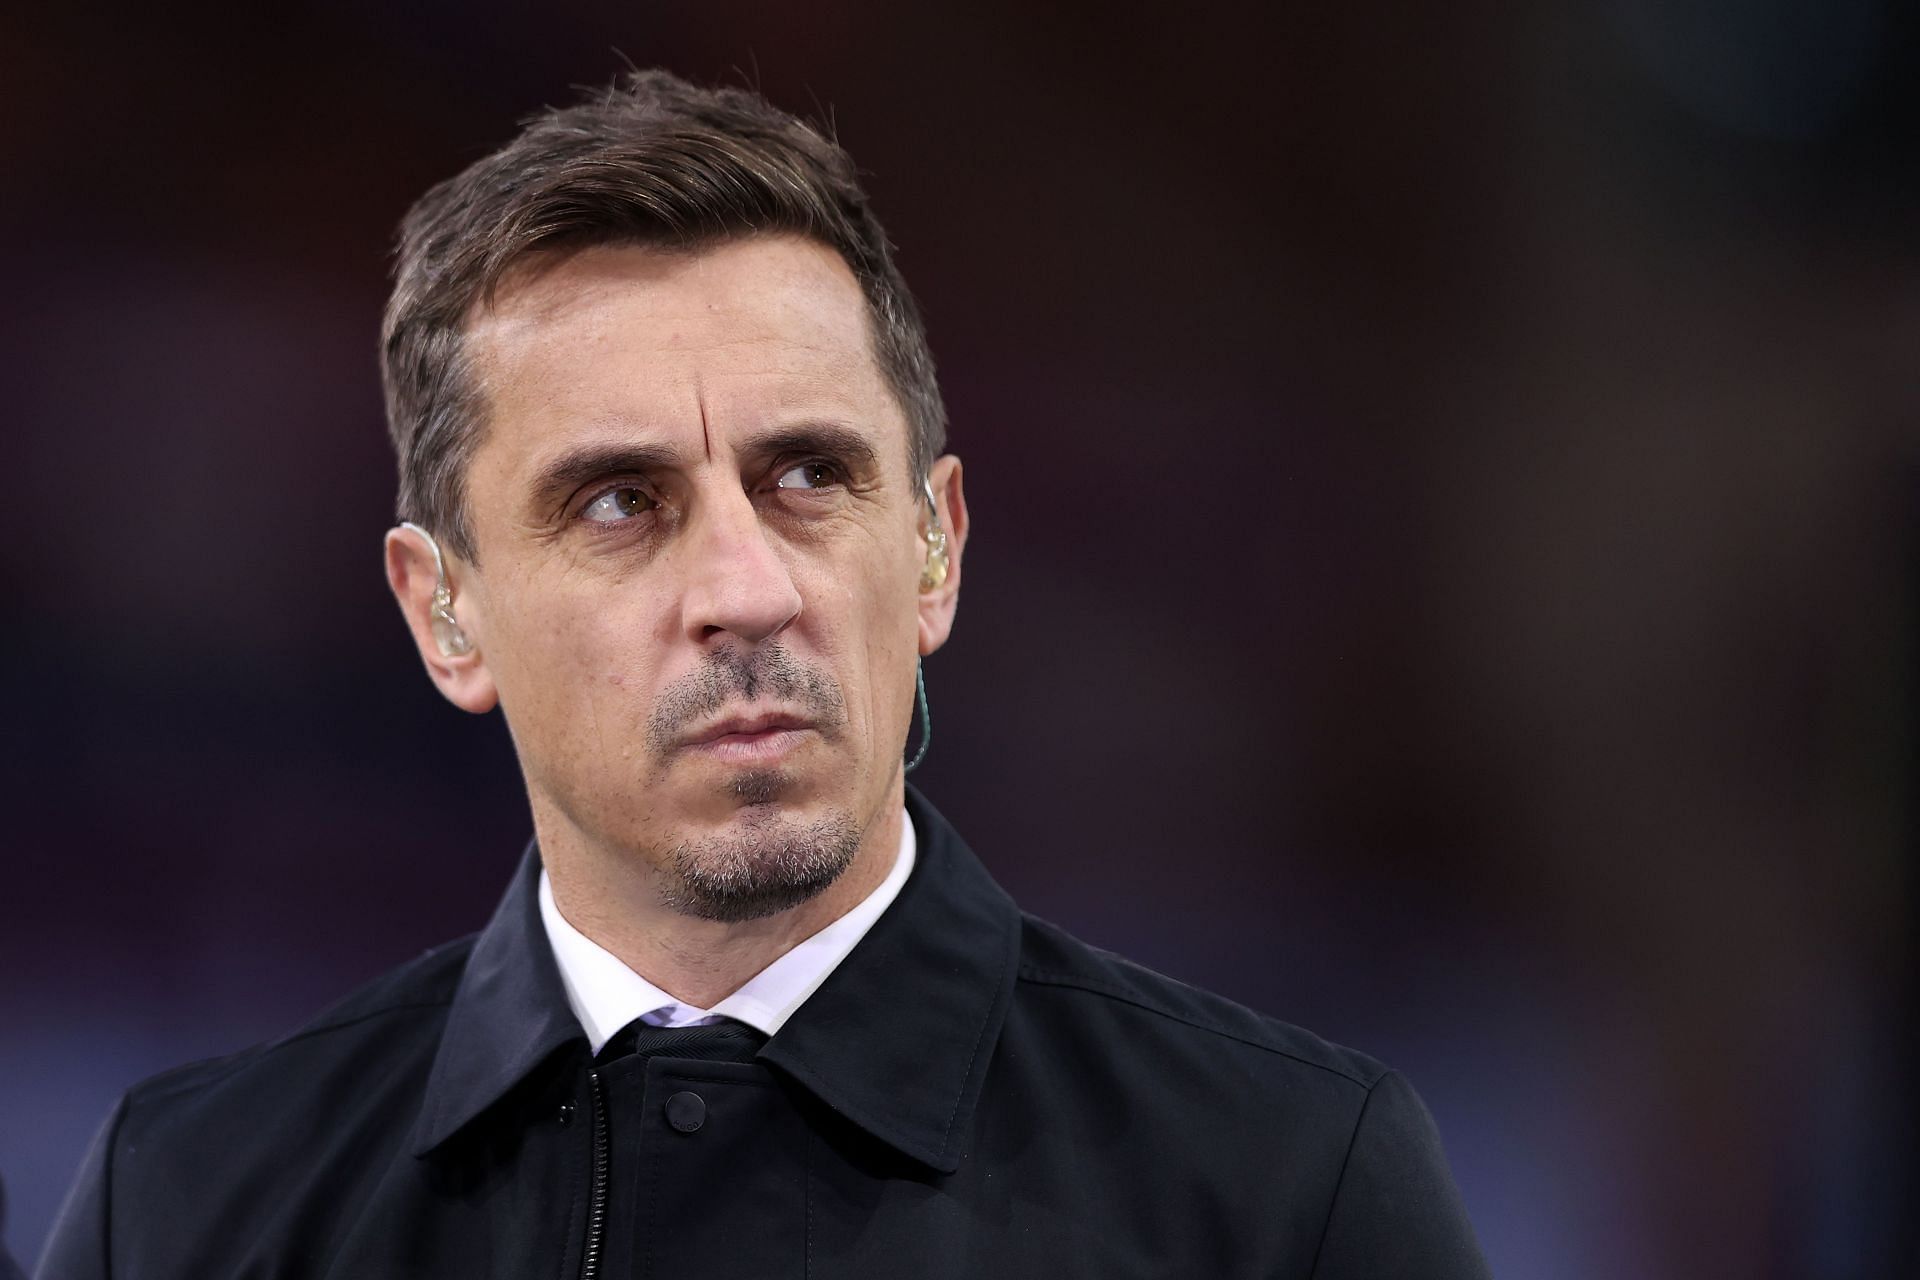 Gary Neville expects Liverpool to have a good season.